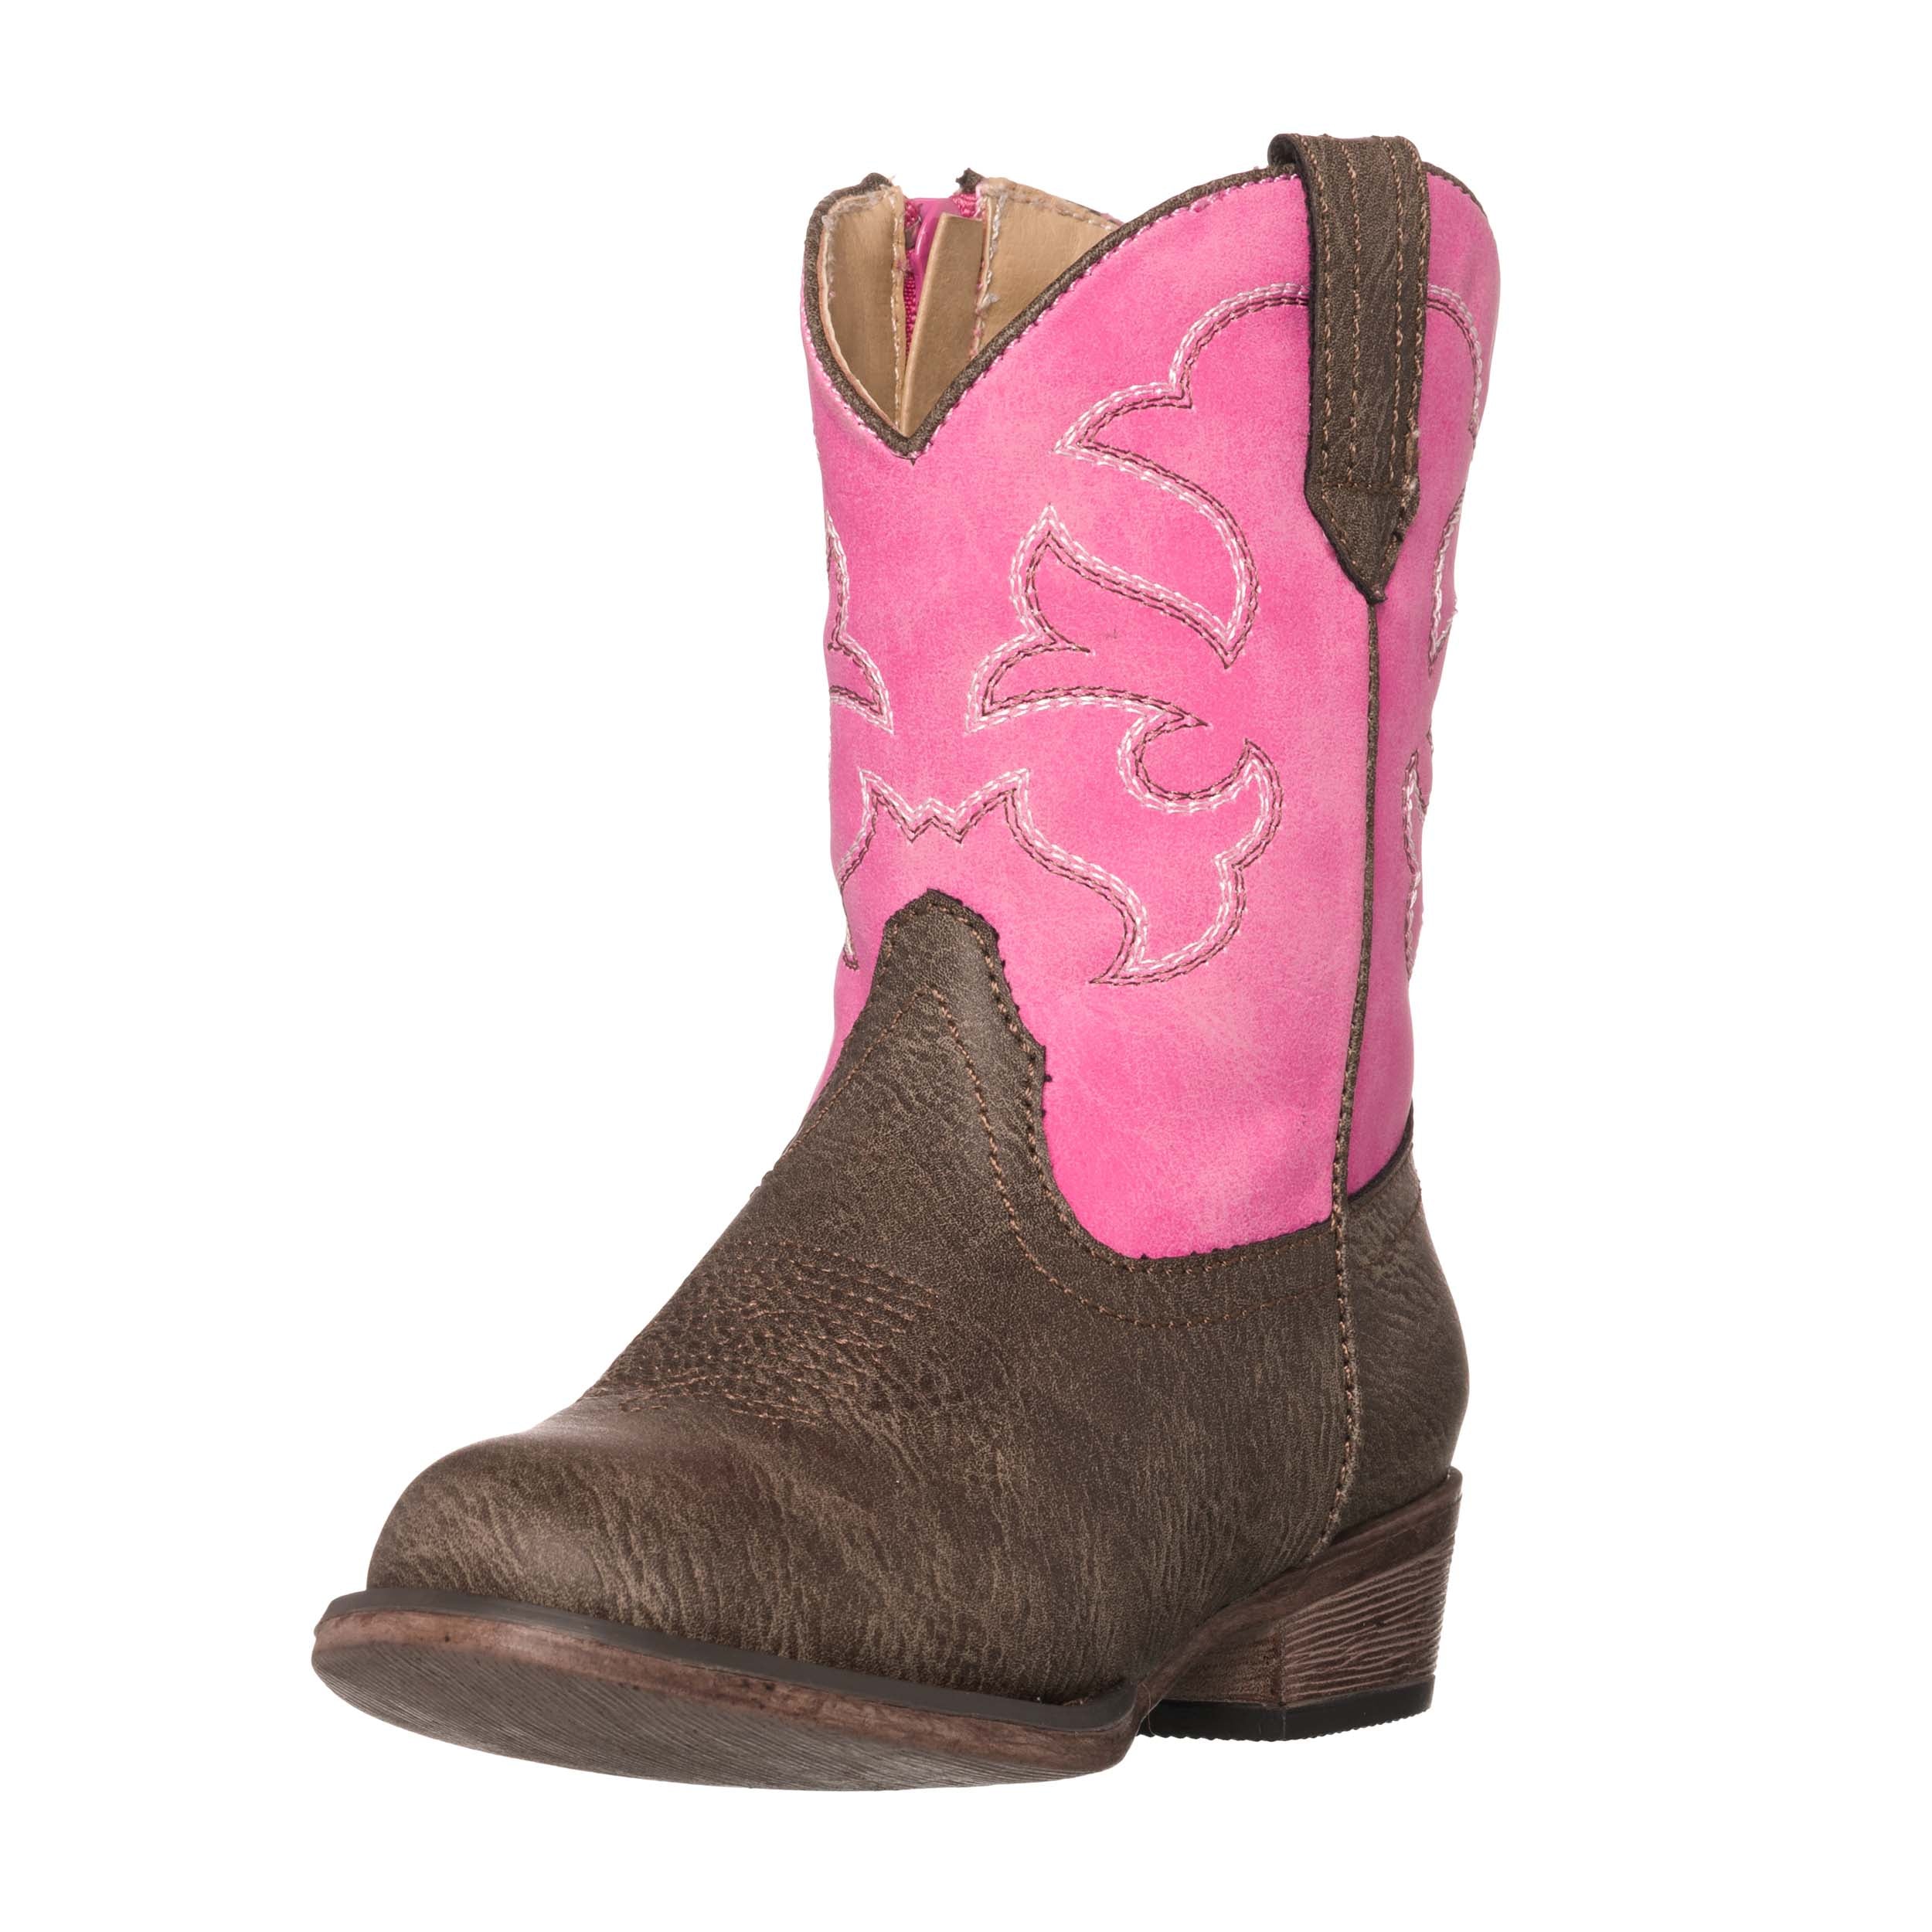 Children Western Kids Cowboy Boot | Toddler Monterey Pink Brown for Girls by Silver Canyon